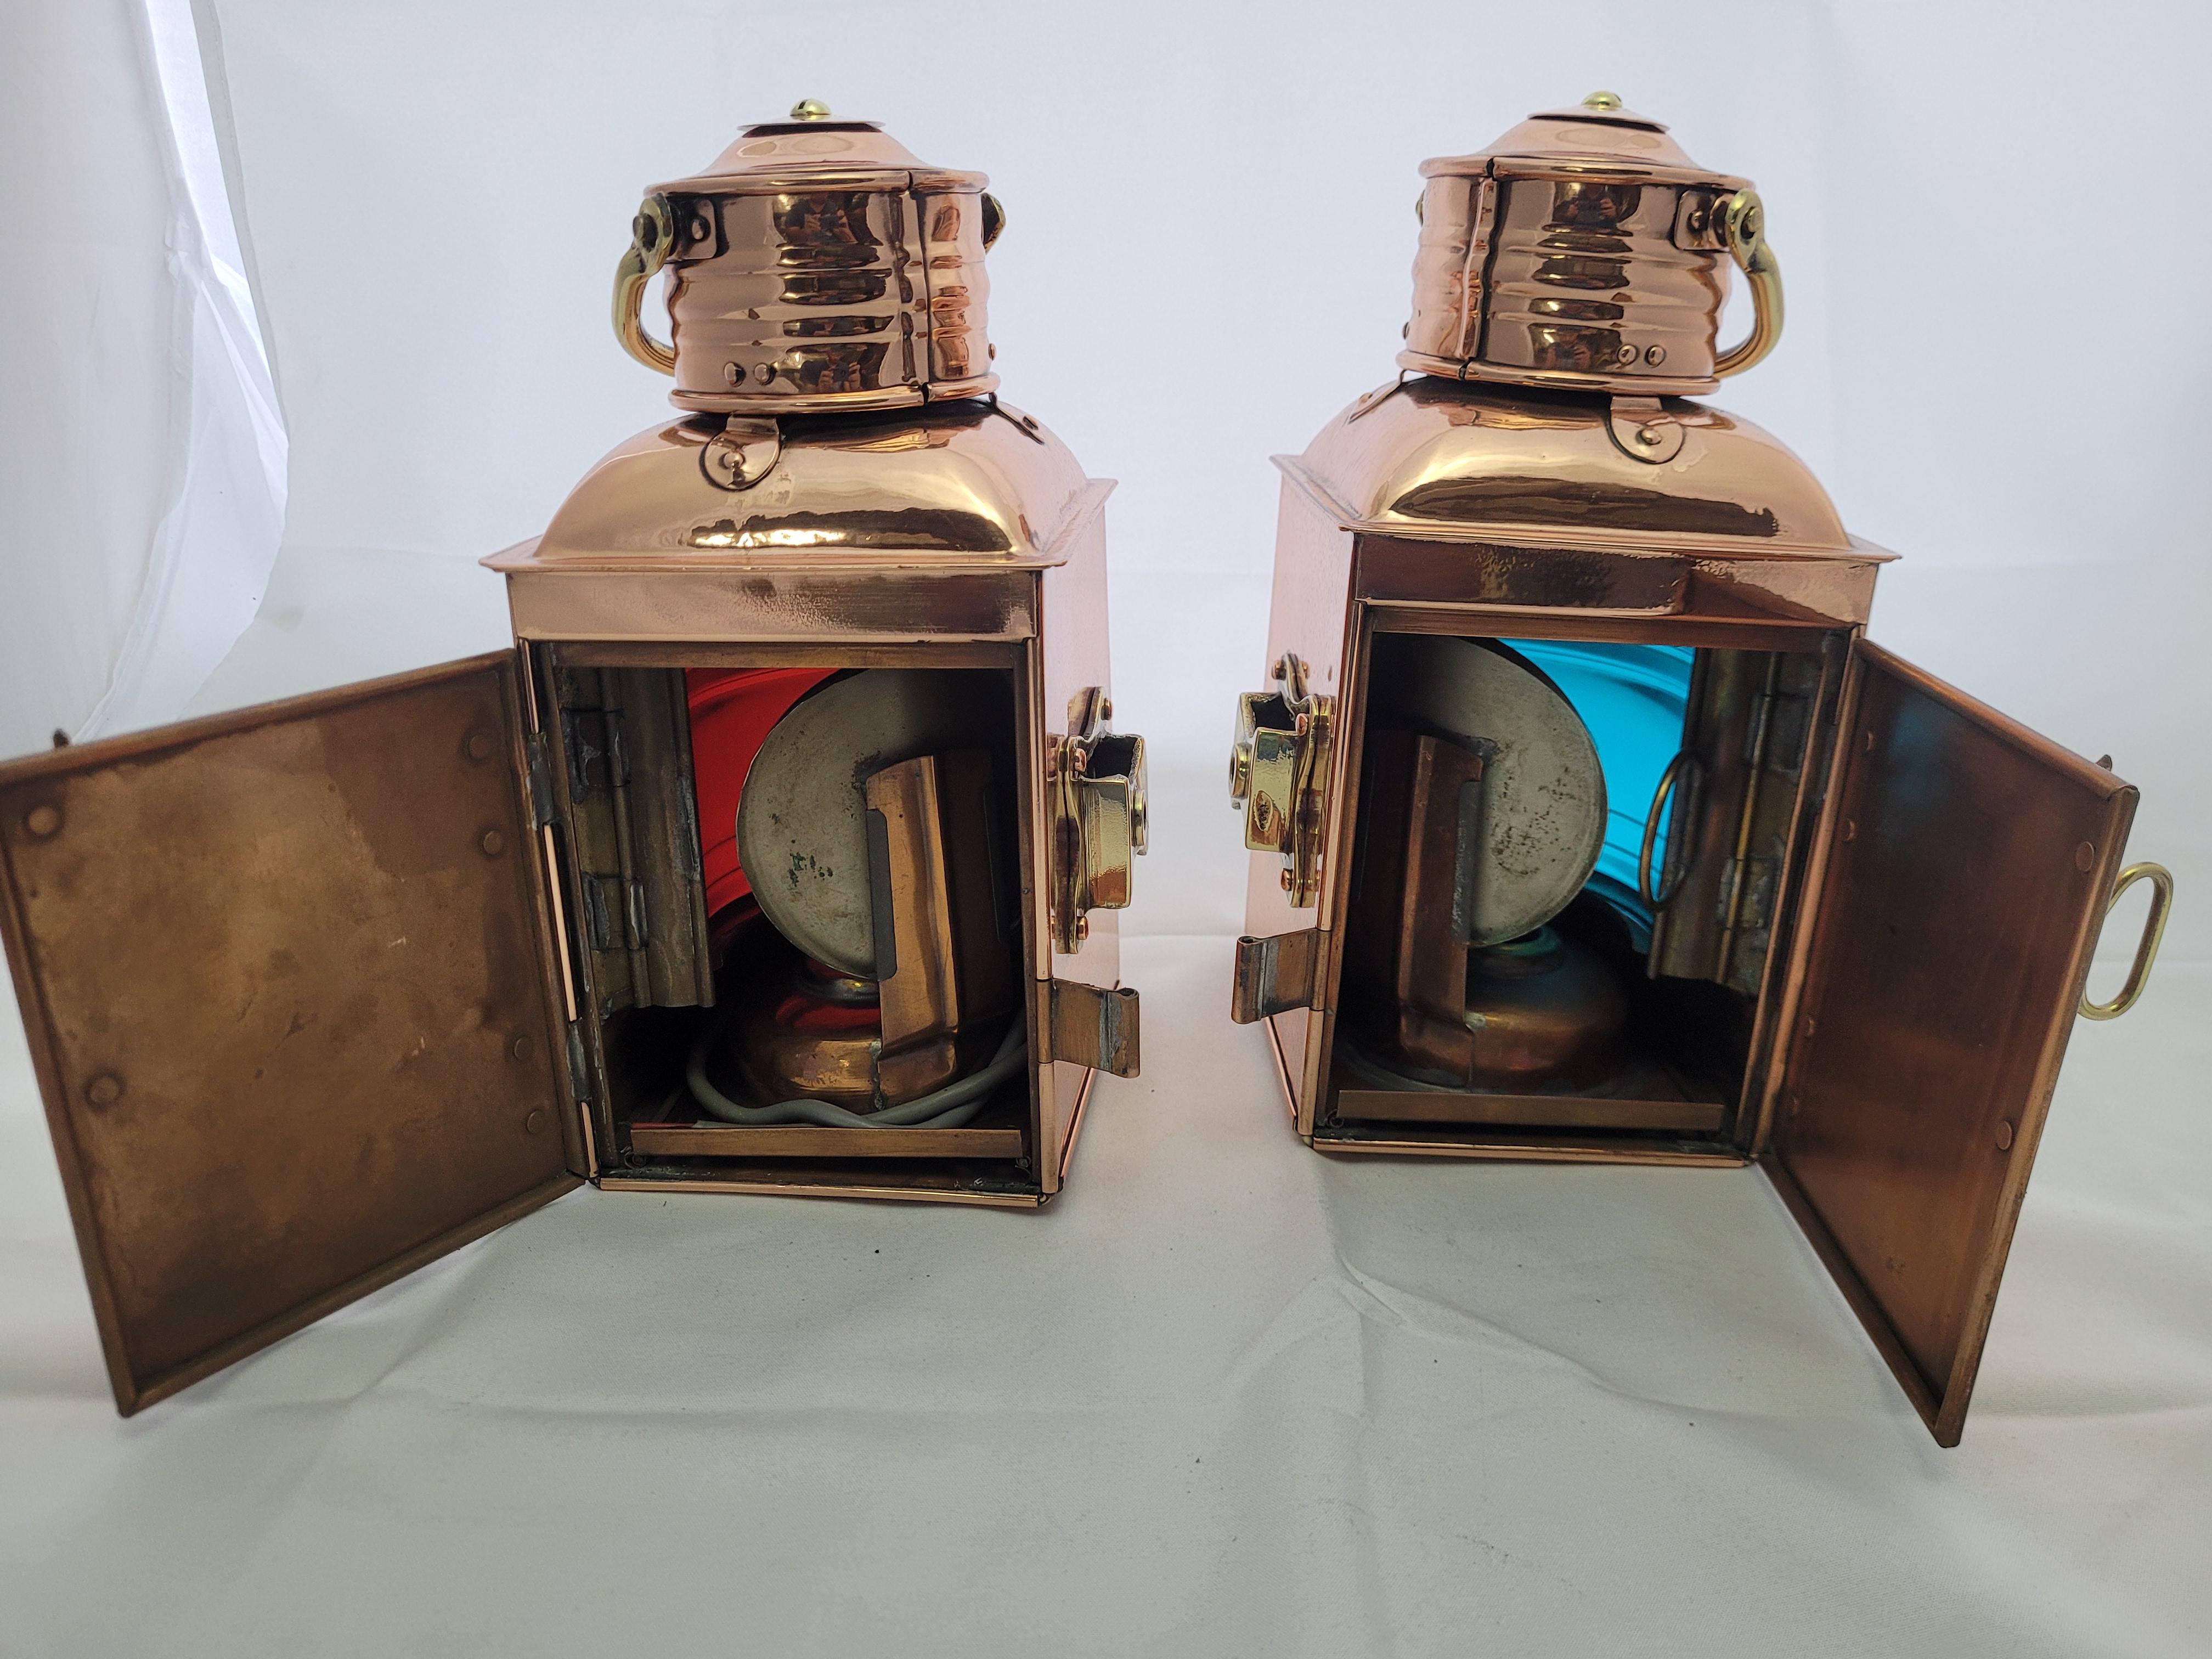 Pair of Copper Ships Lanterns from England 1